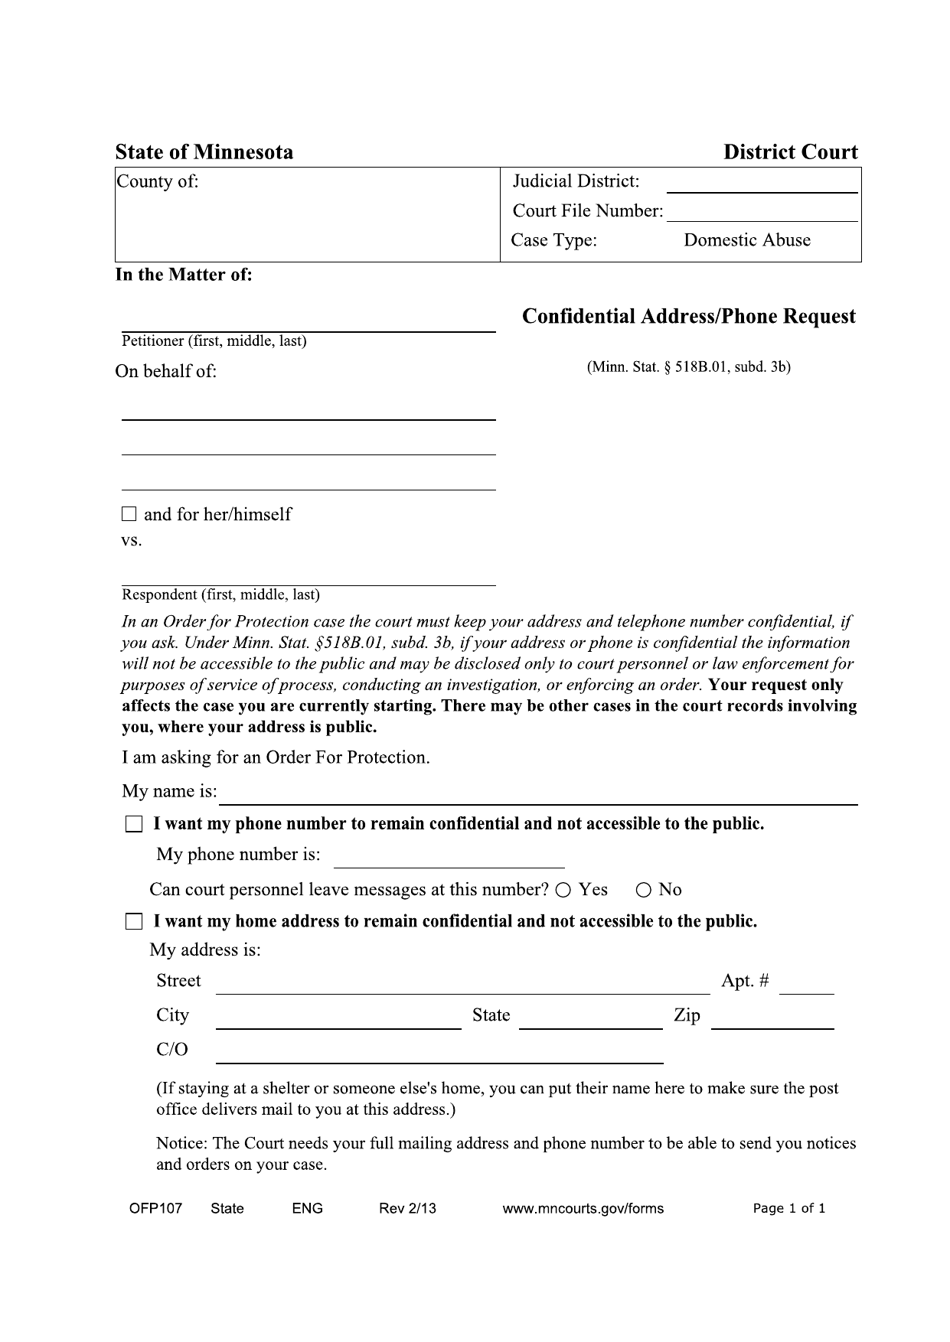 Form OFP107 Confidential Address / Phone Request - Minnesota, Page 1